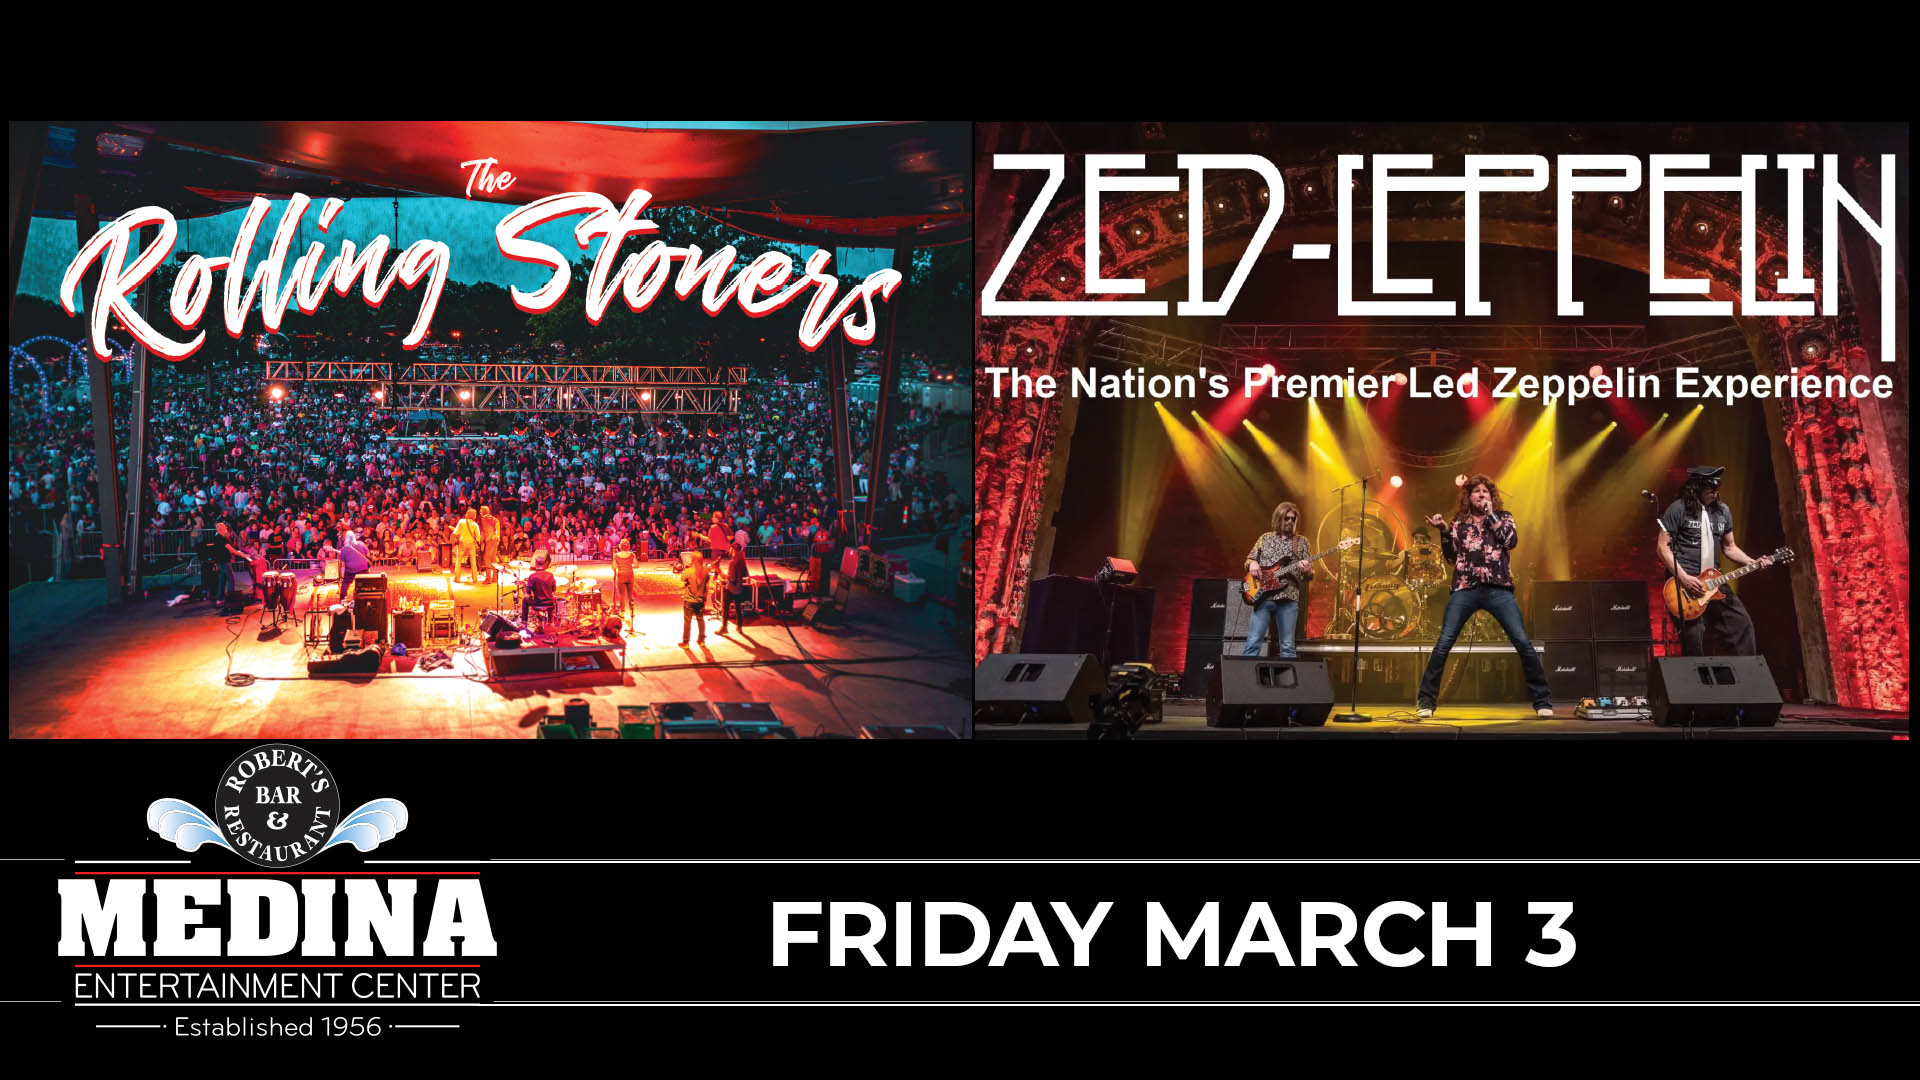 The Rolling Stoners + Zed Zeppelin Medina Entertainment Center Friday, March 3, 2023 Doors: 7:00PM | Music: 8:00PM | 21+ Tickets on-sale Friday, December 23 at 11am Ticket Prices: $27.00 (Gold Seating), $22.00 (Silver Seating) & $17.00 (GA Seating) plus applicable fees